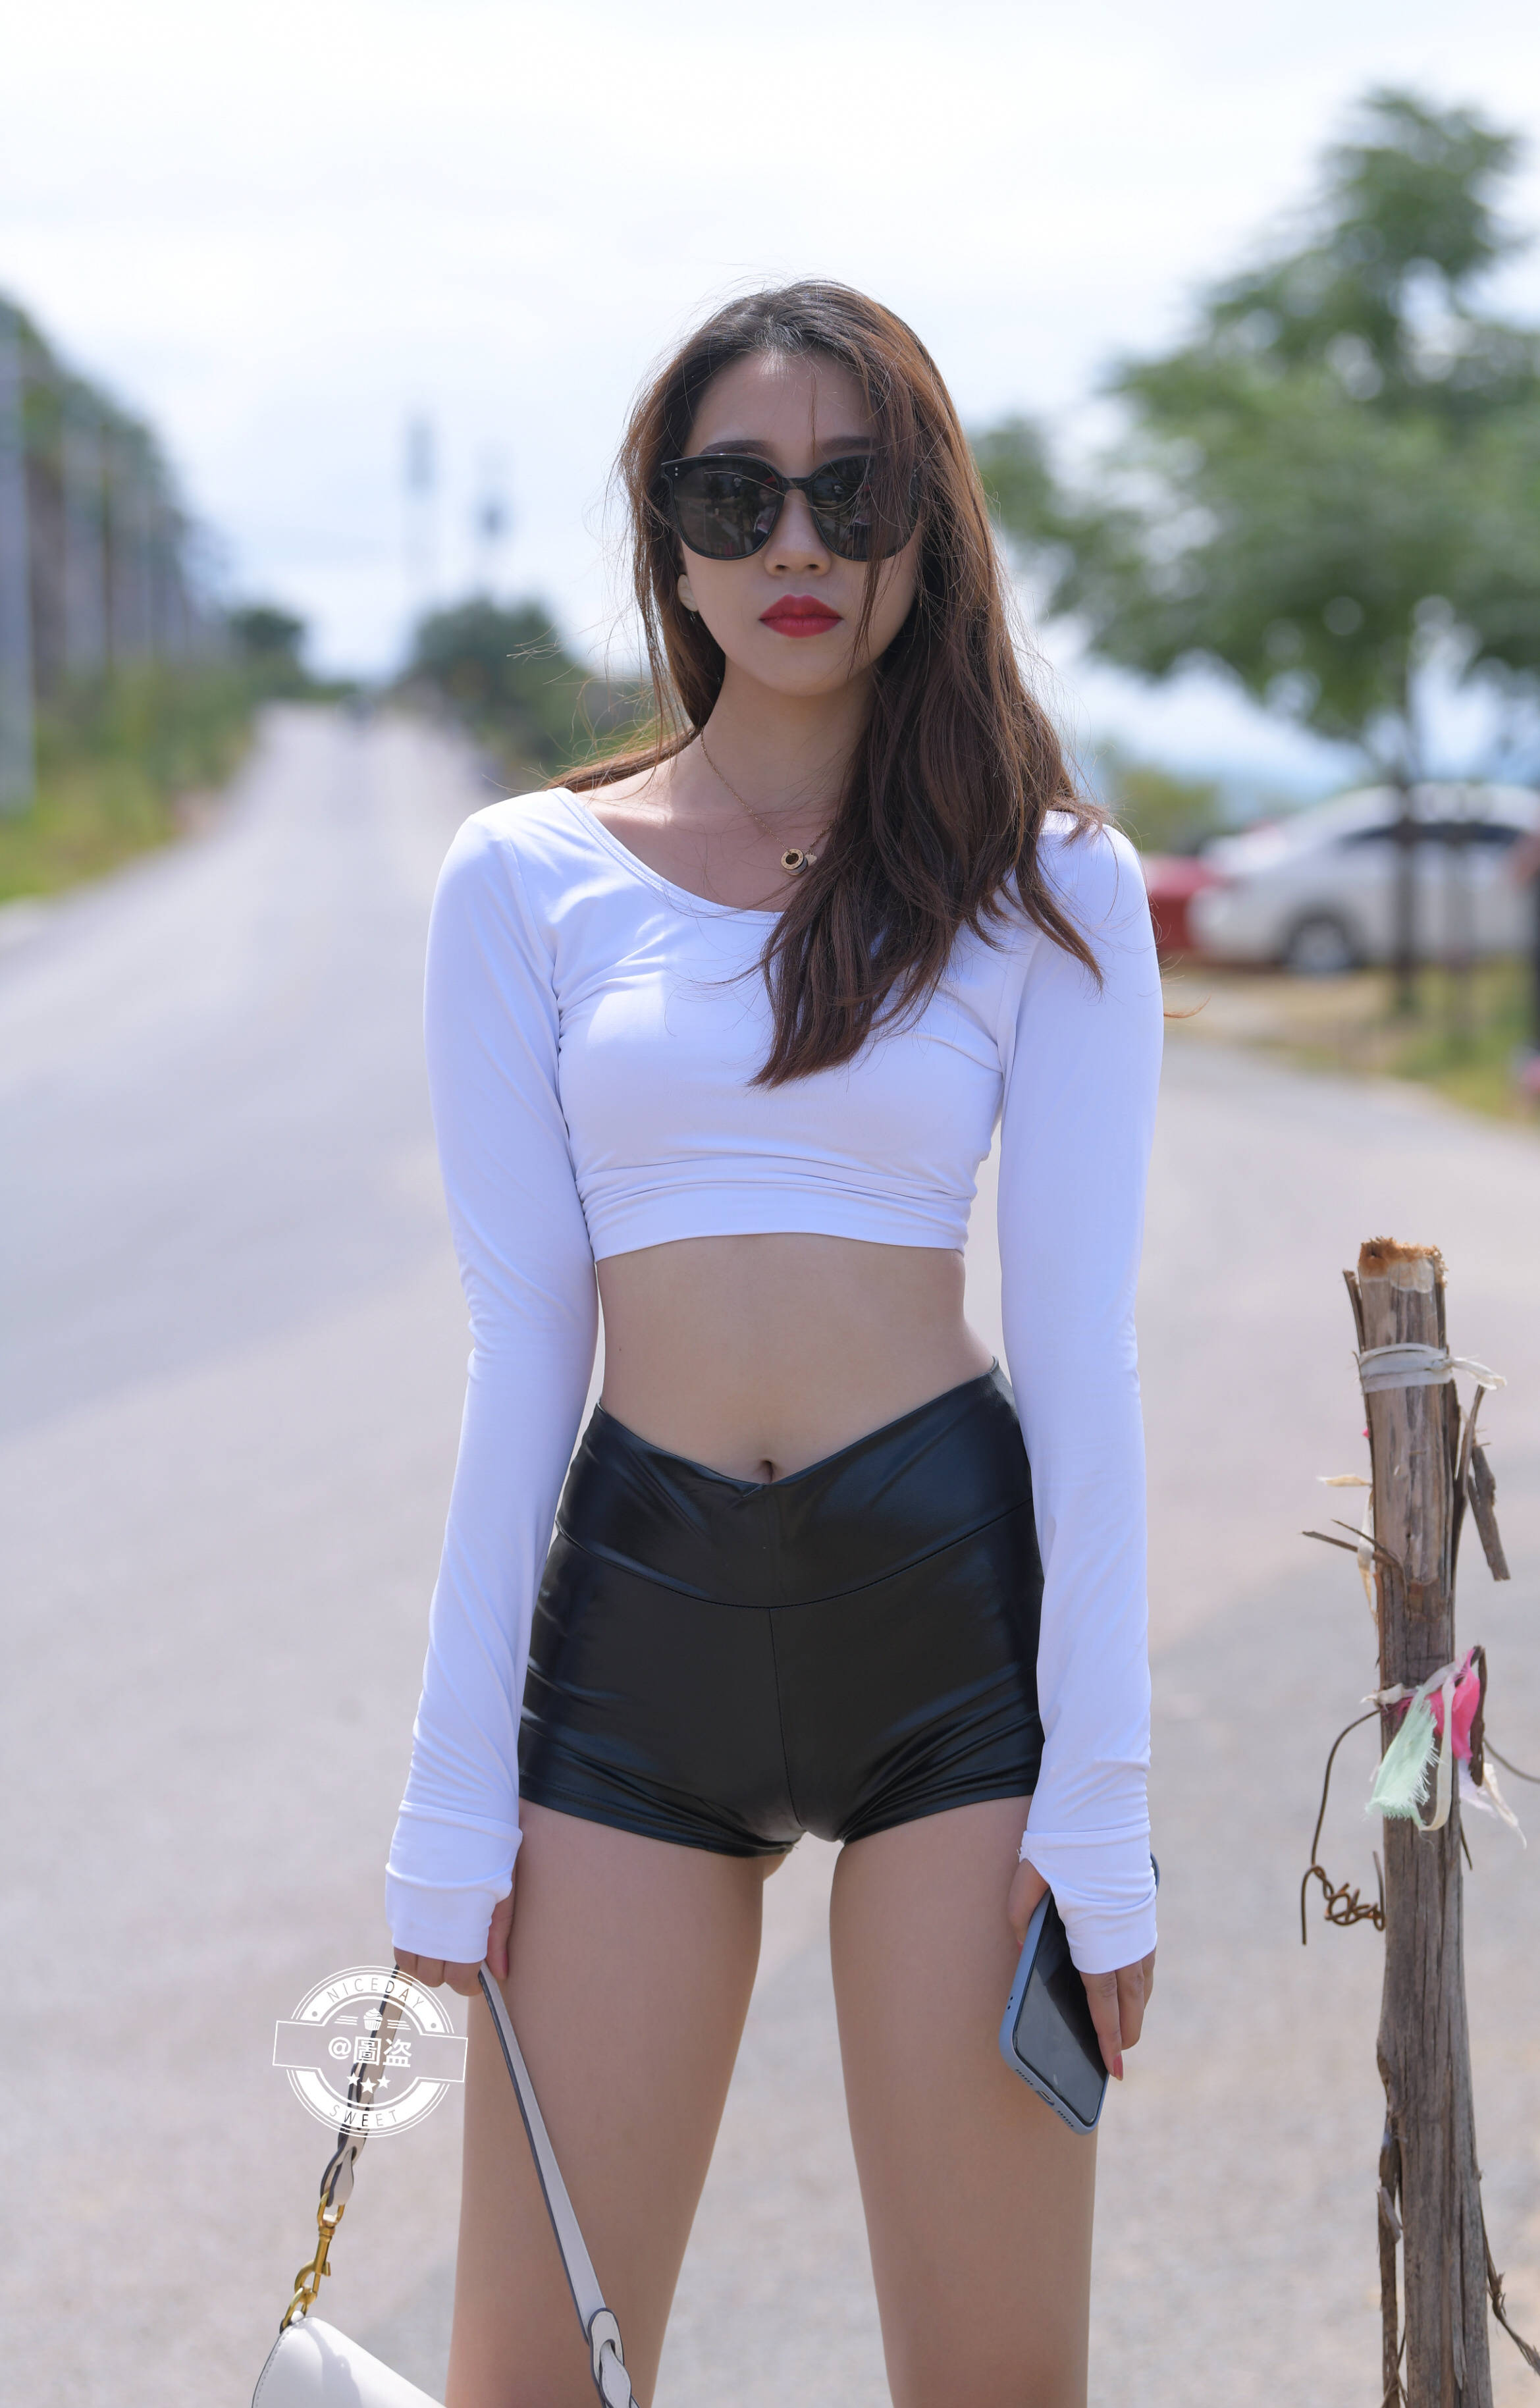 Women Street Asian White T Shirt Long Sleeves Leather Clothing Women With Shades 2339x3657